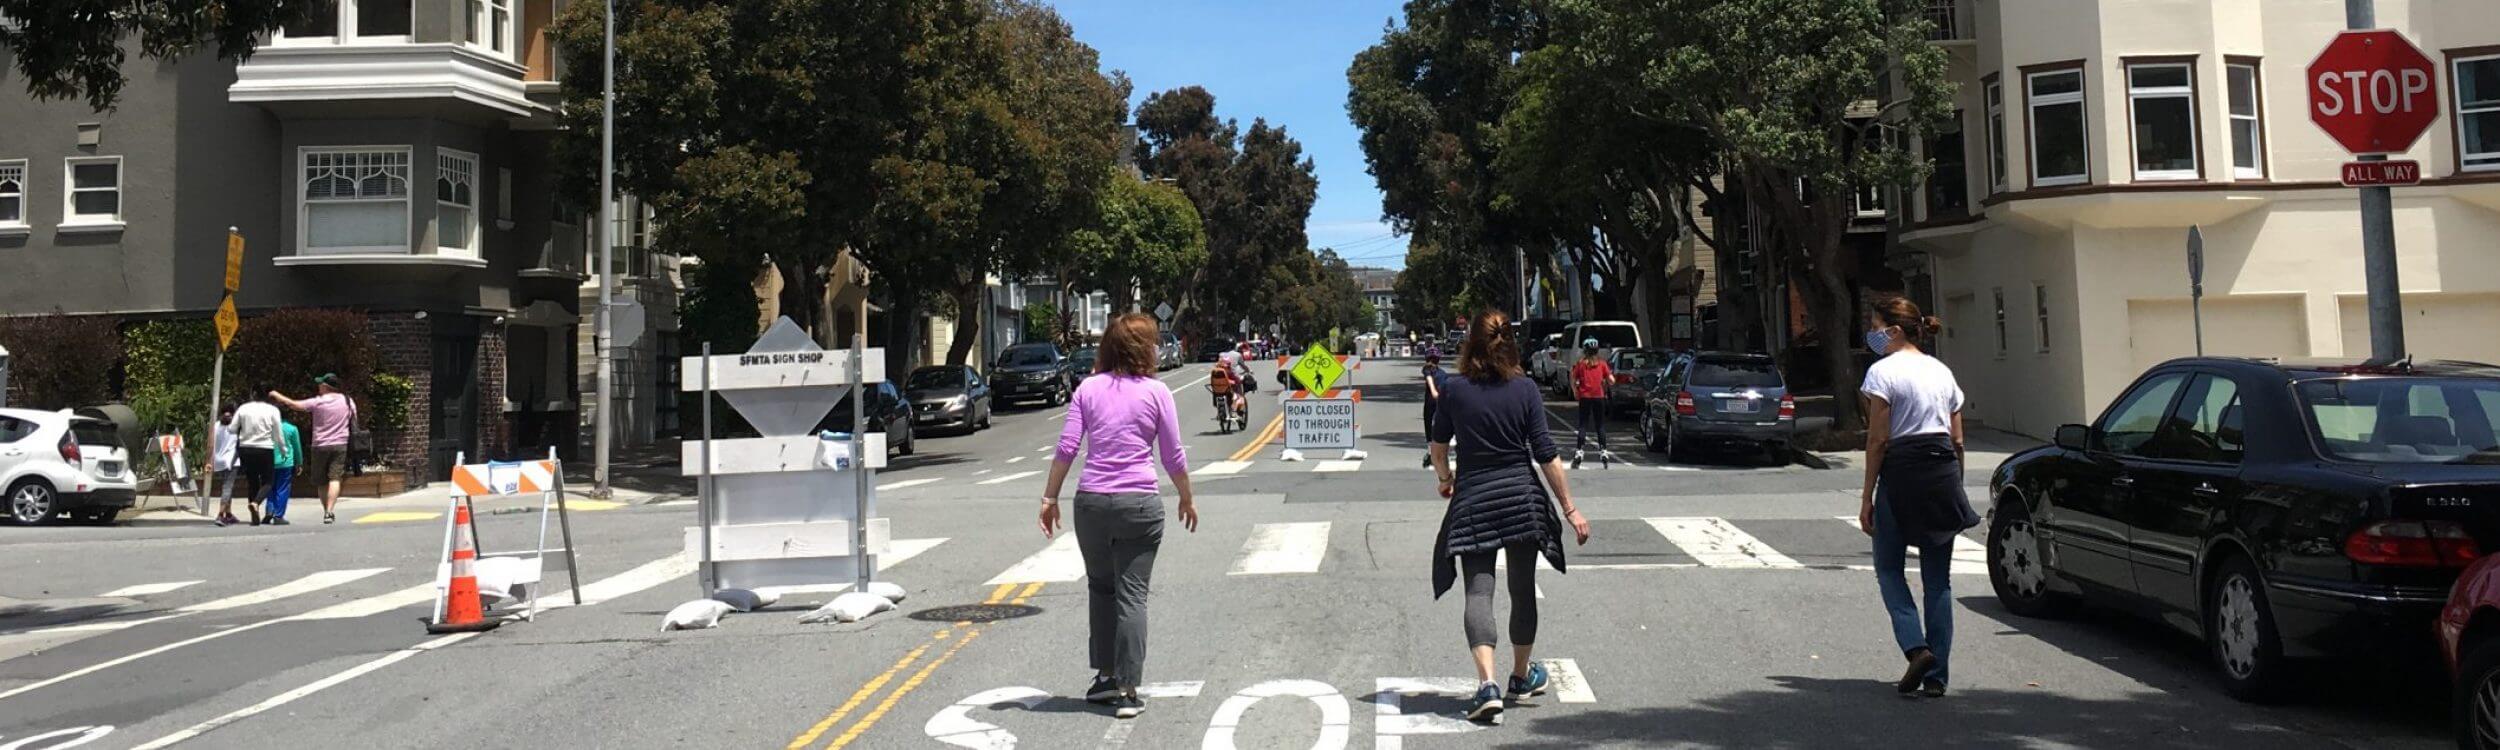 Creating safe spaces on our streets during Covid-19: principles for San Francisco